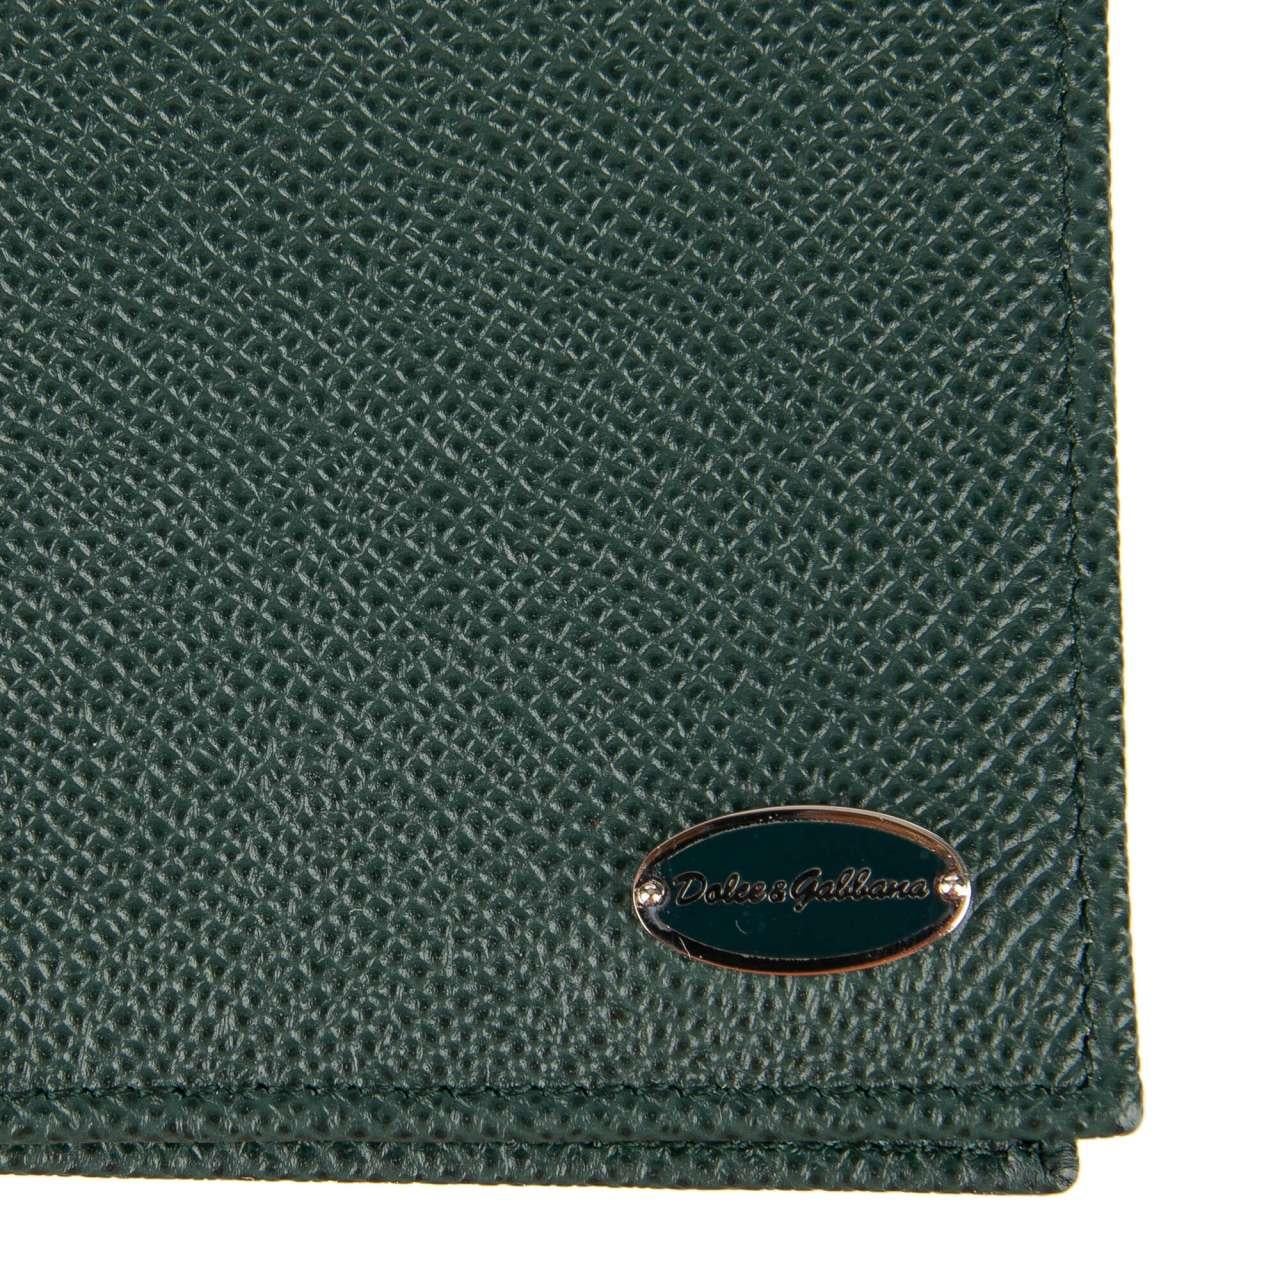 Dolce & Gabbana Large Dauphine Leather Wallet with Pockets and Logo Plate Green For Sale 1